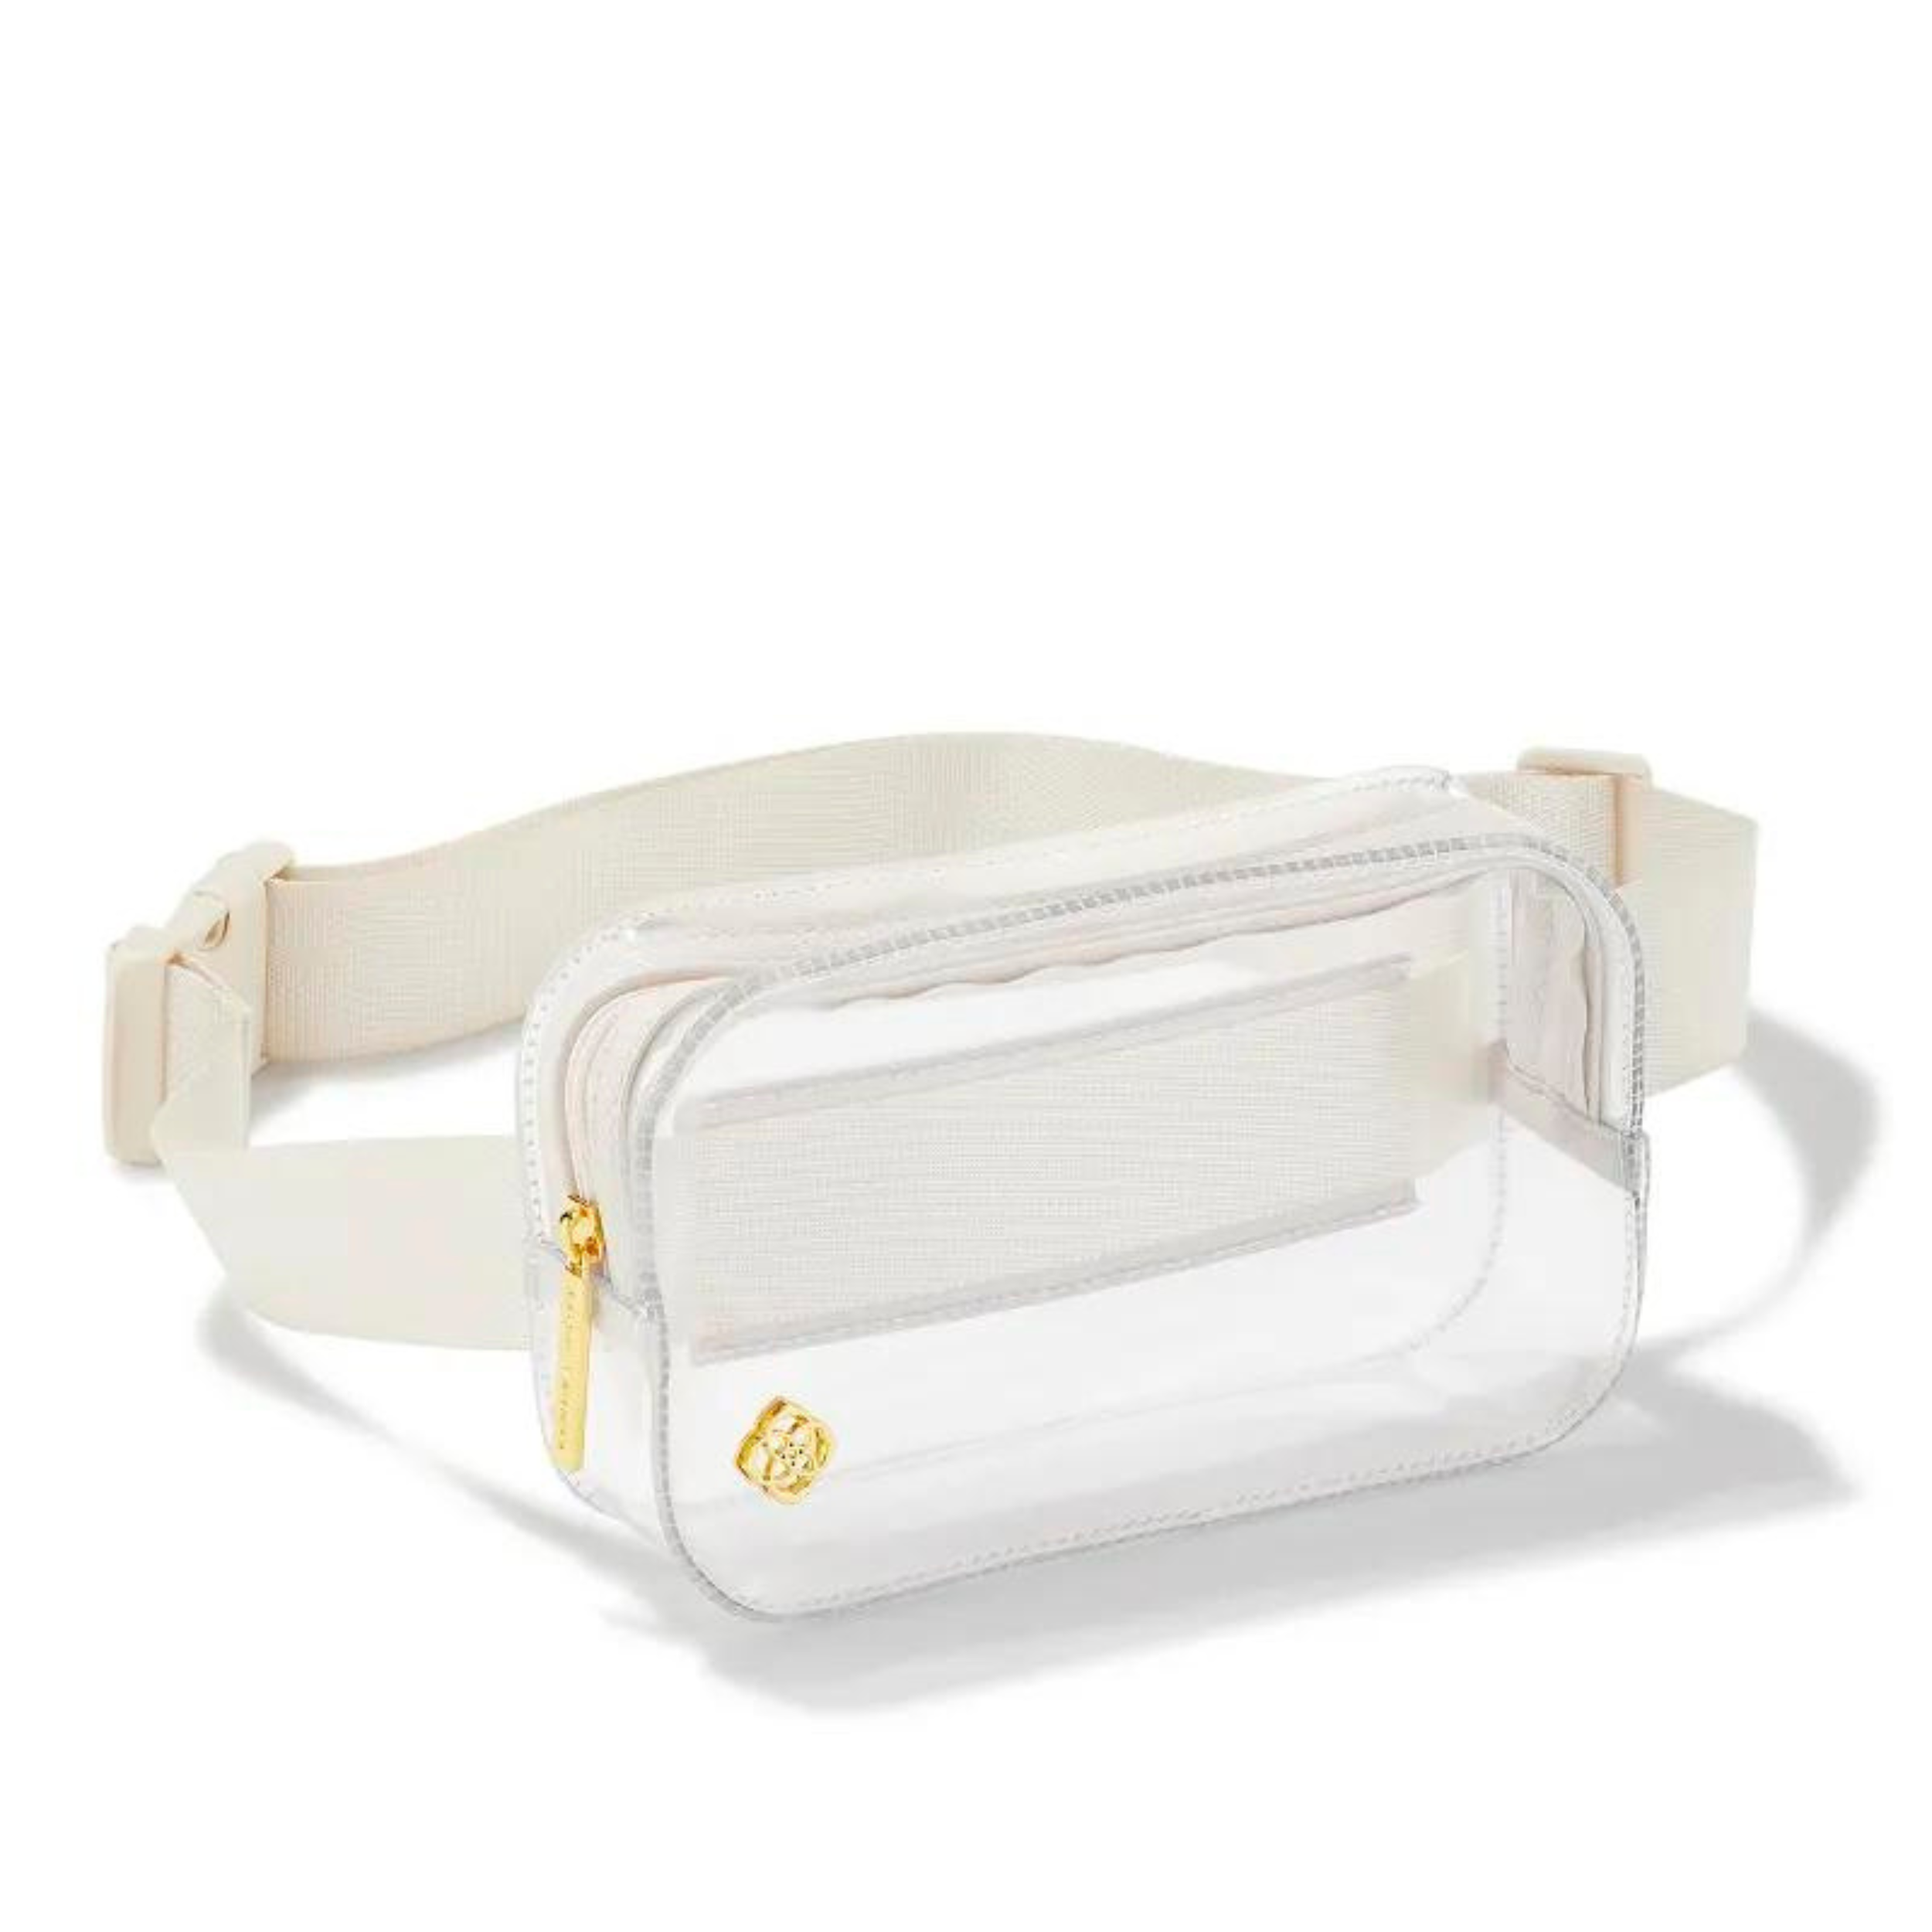 A clear fanny pack with an ivory strap and gold tone Kendra Scott emblem on the front corner pictured on a white background.